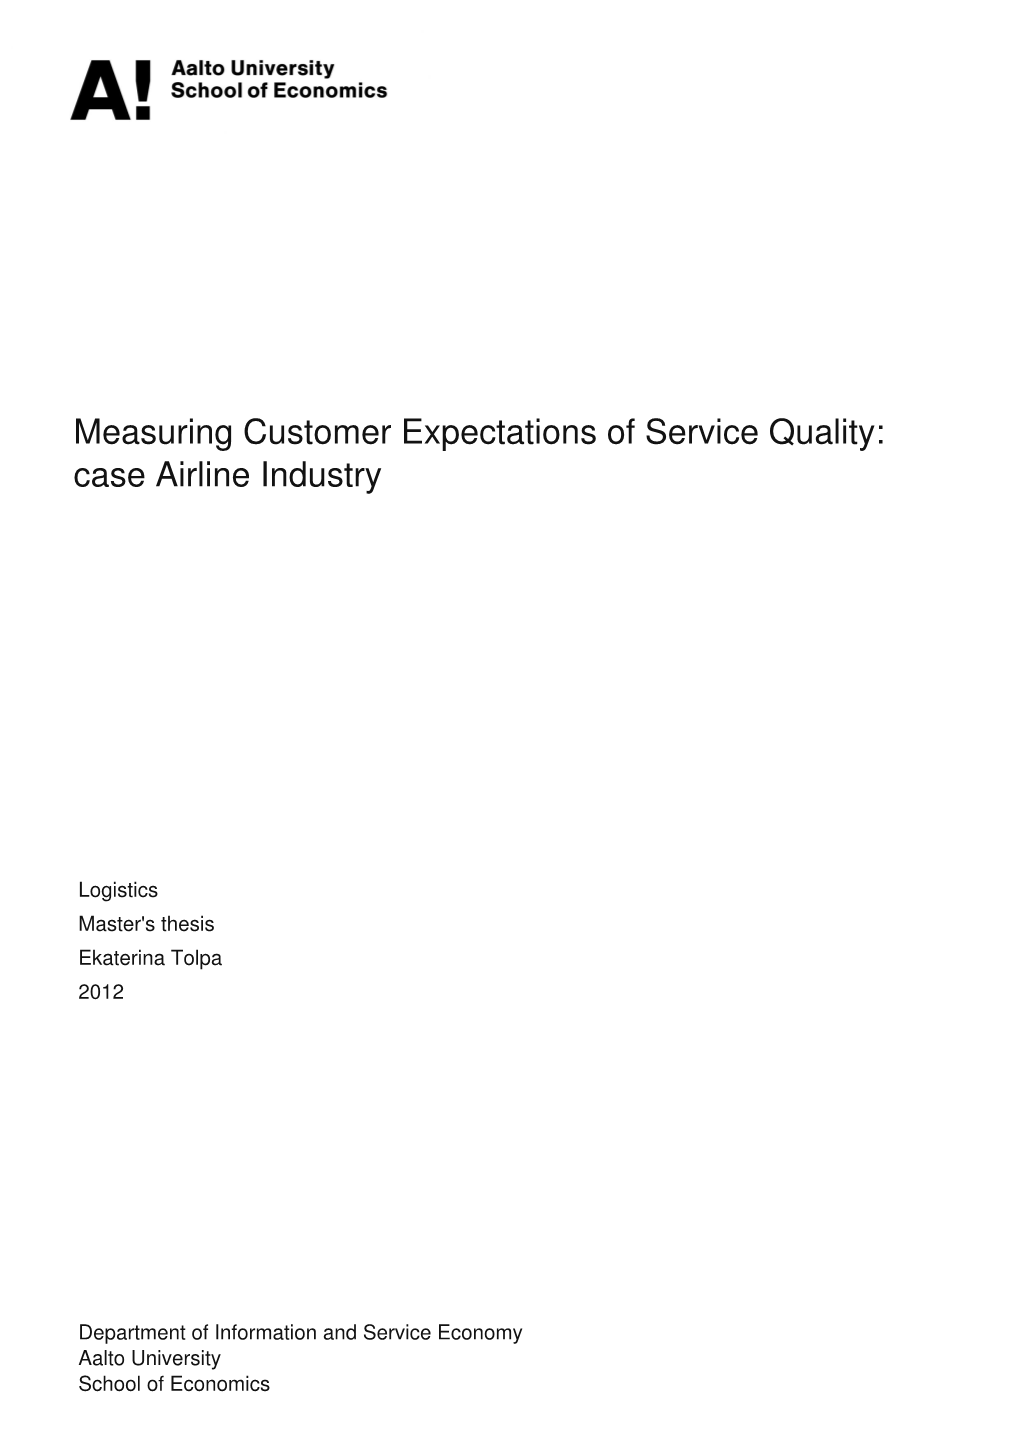 Measuring Customer Expectations of Service Quality: Case Airline Industry